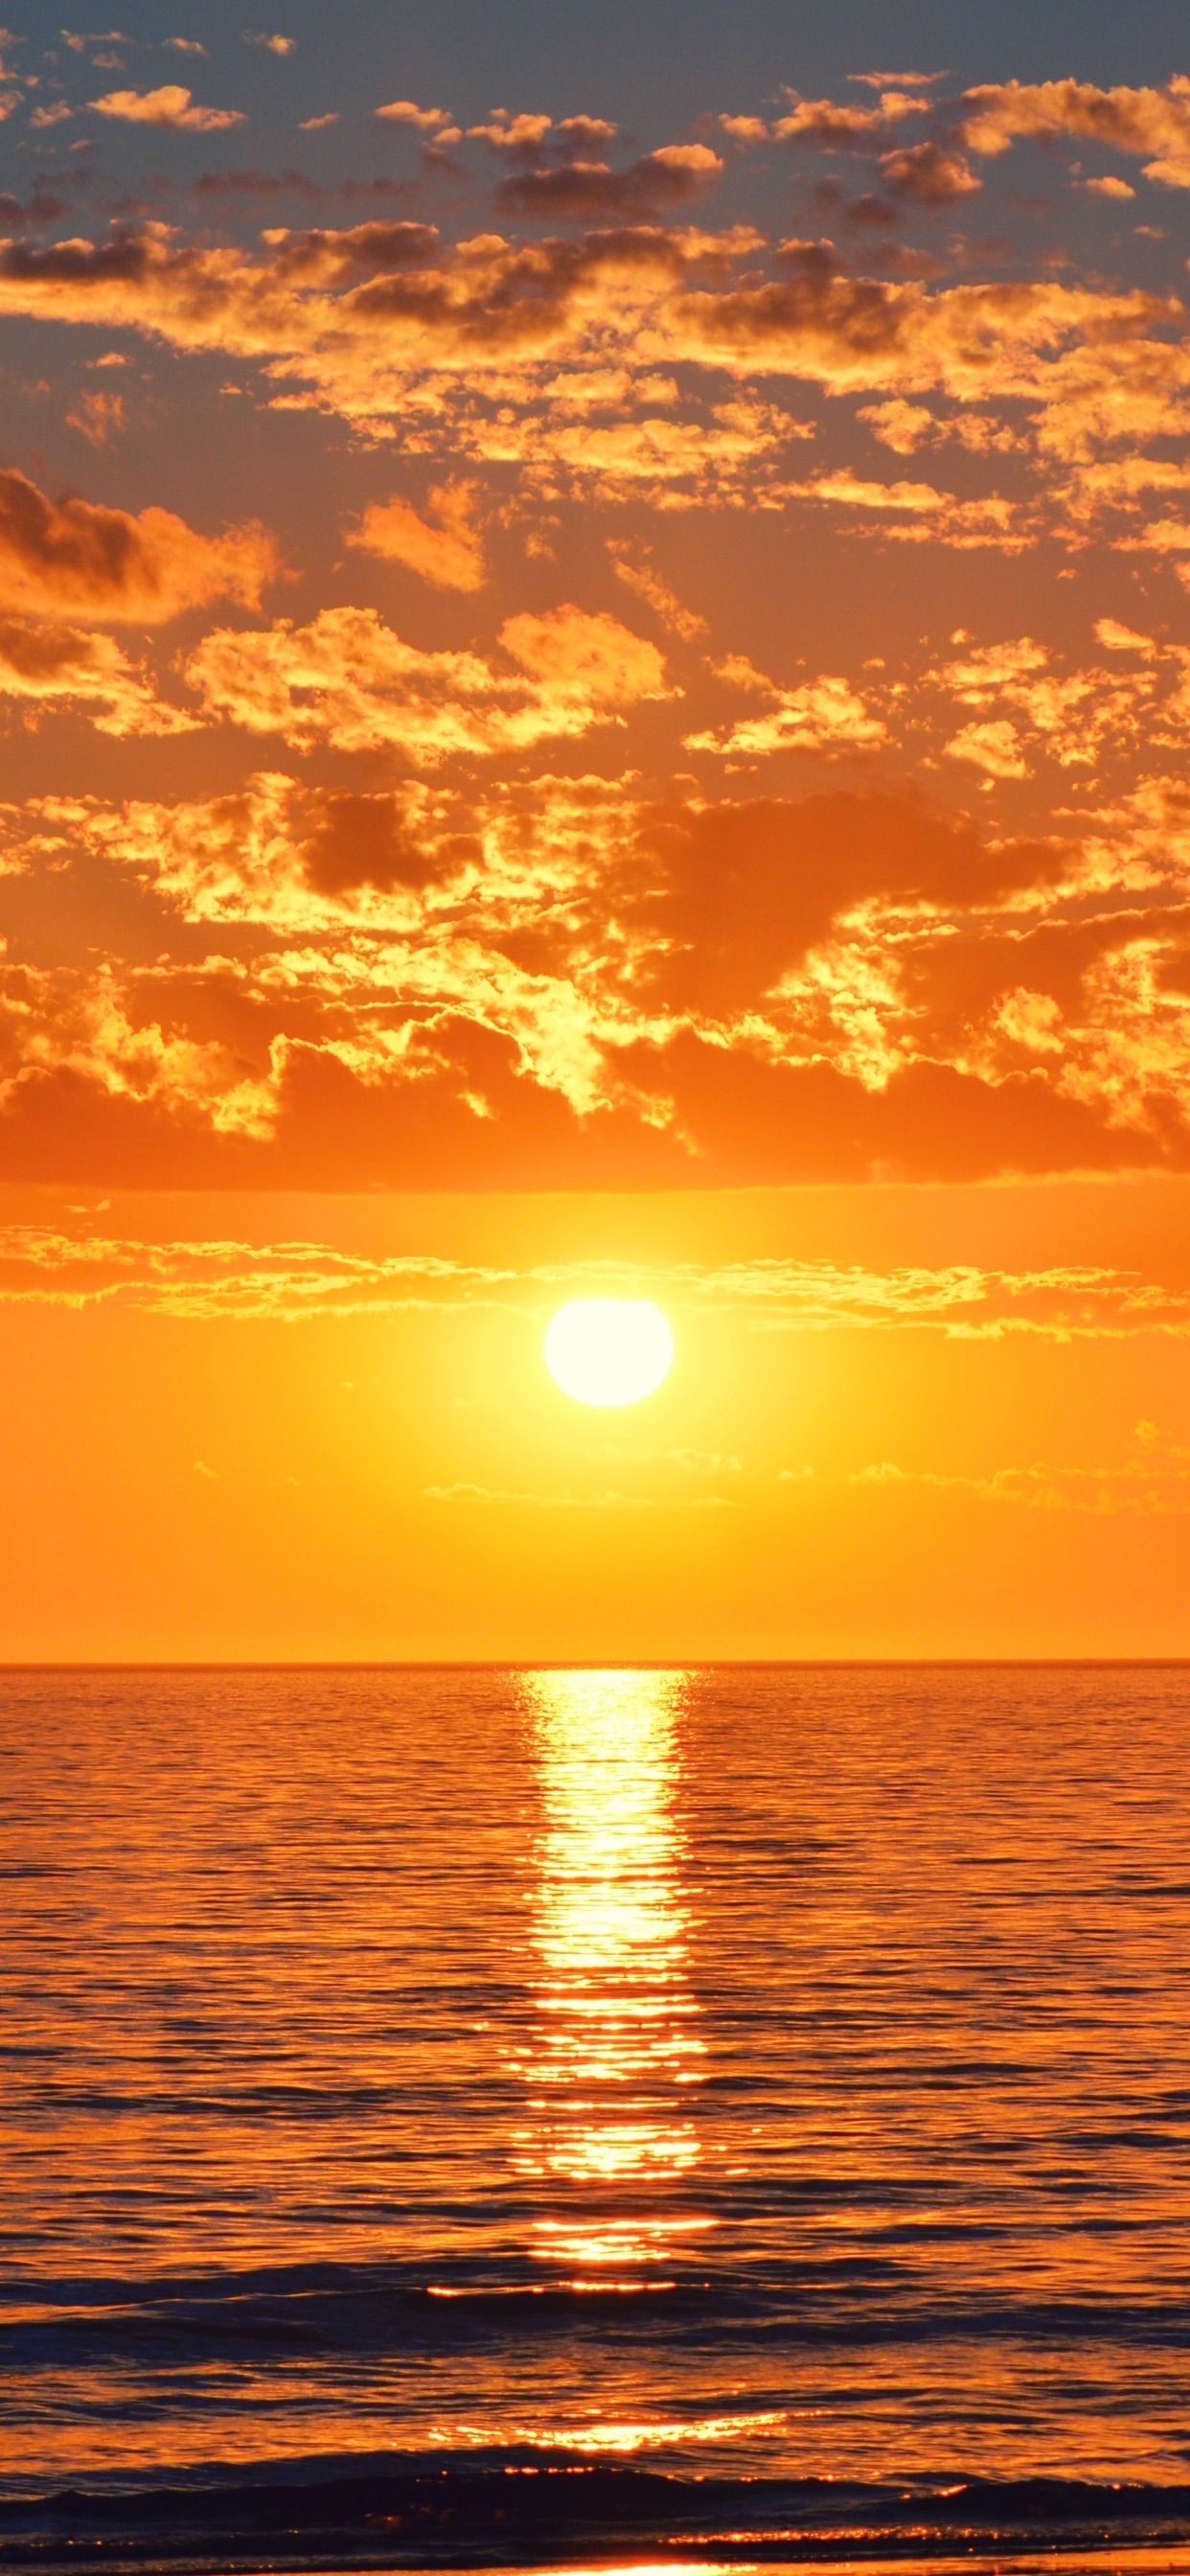 Orange background sunset - Beautiful and scenic wallpapers